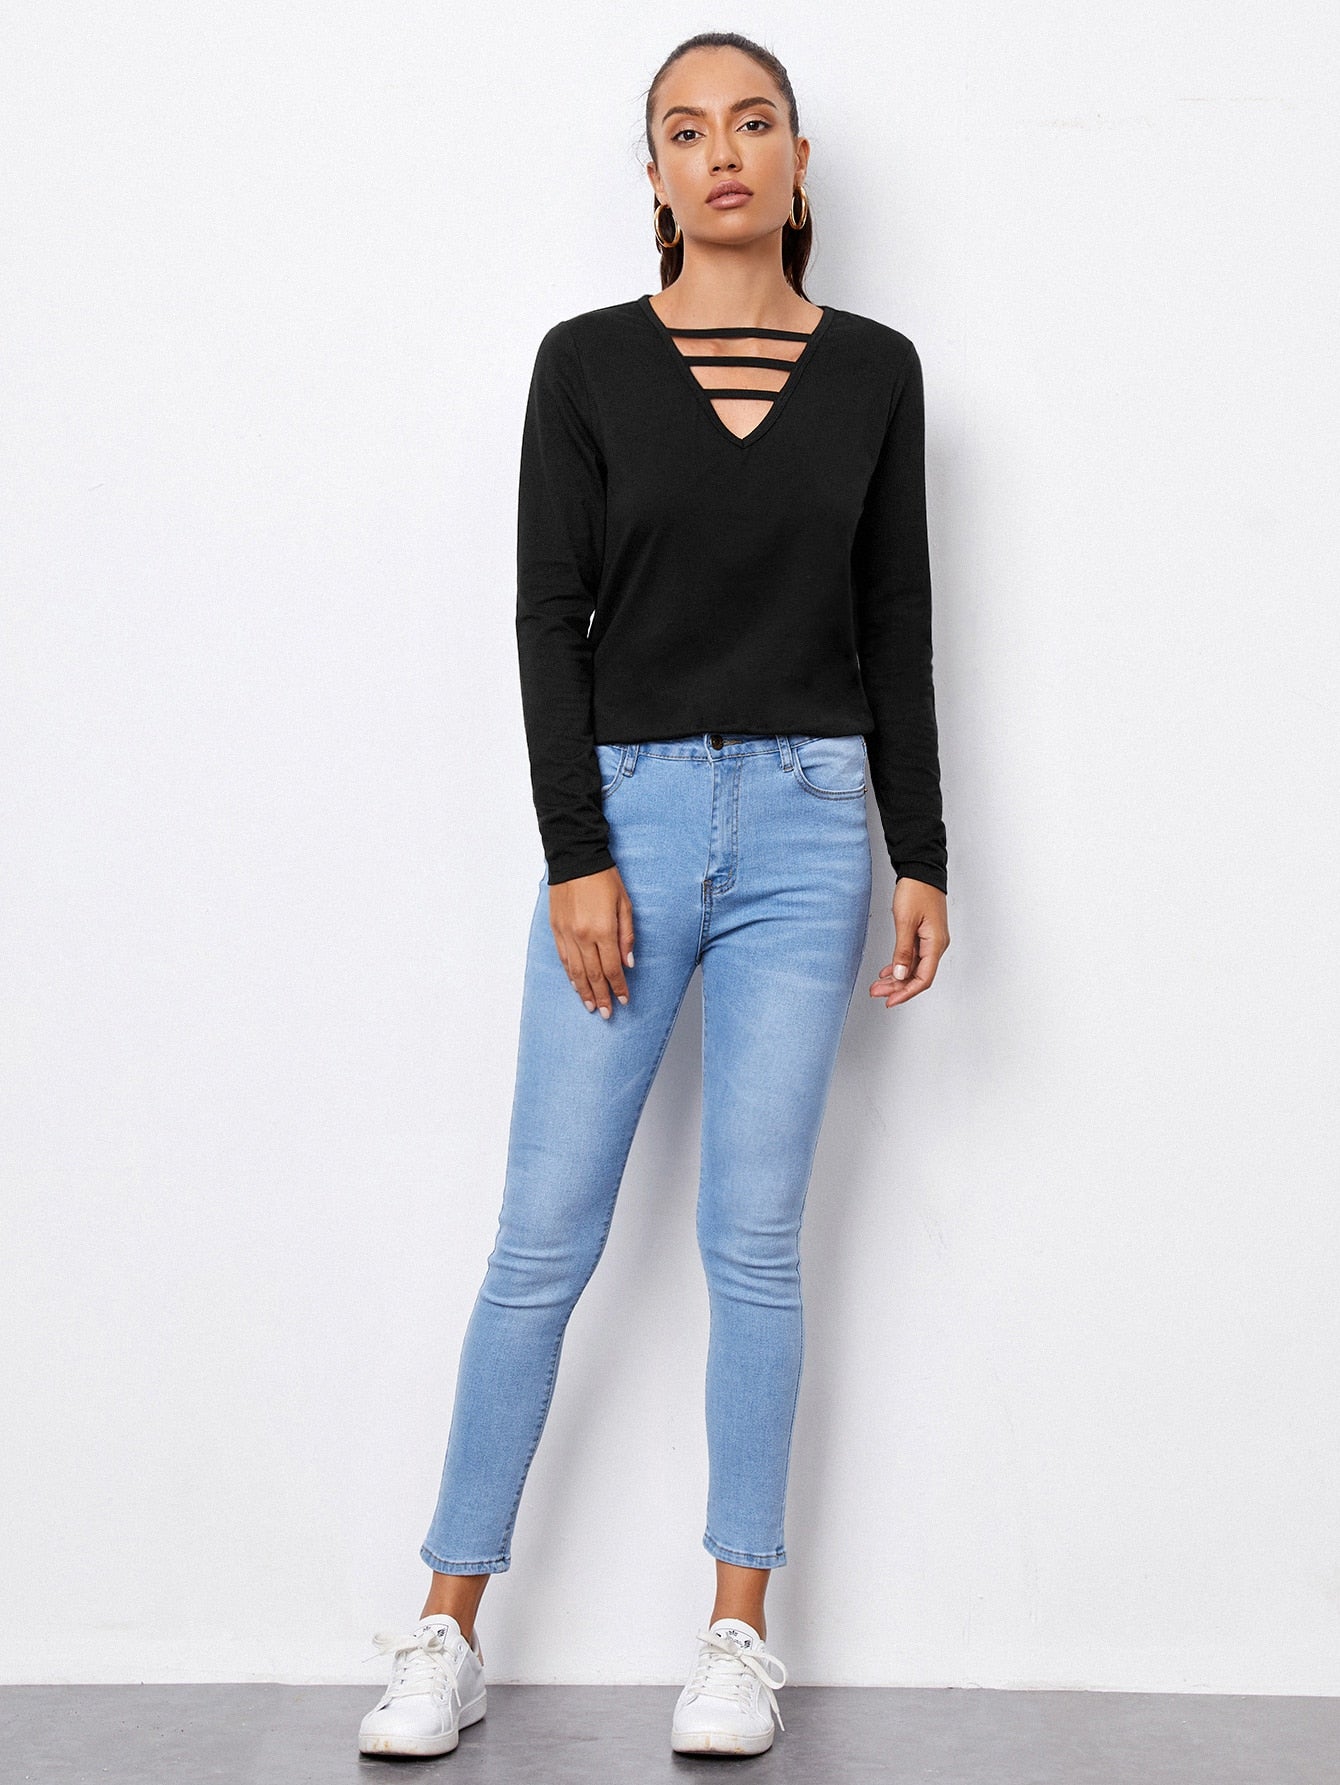 Cut Out Neck Solid Tee